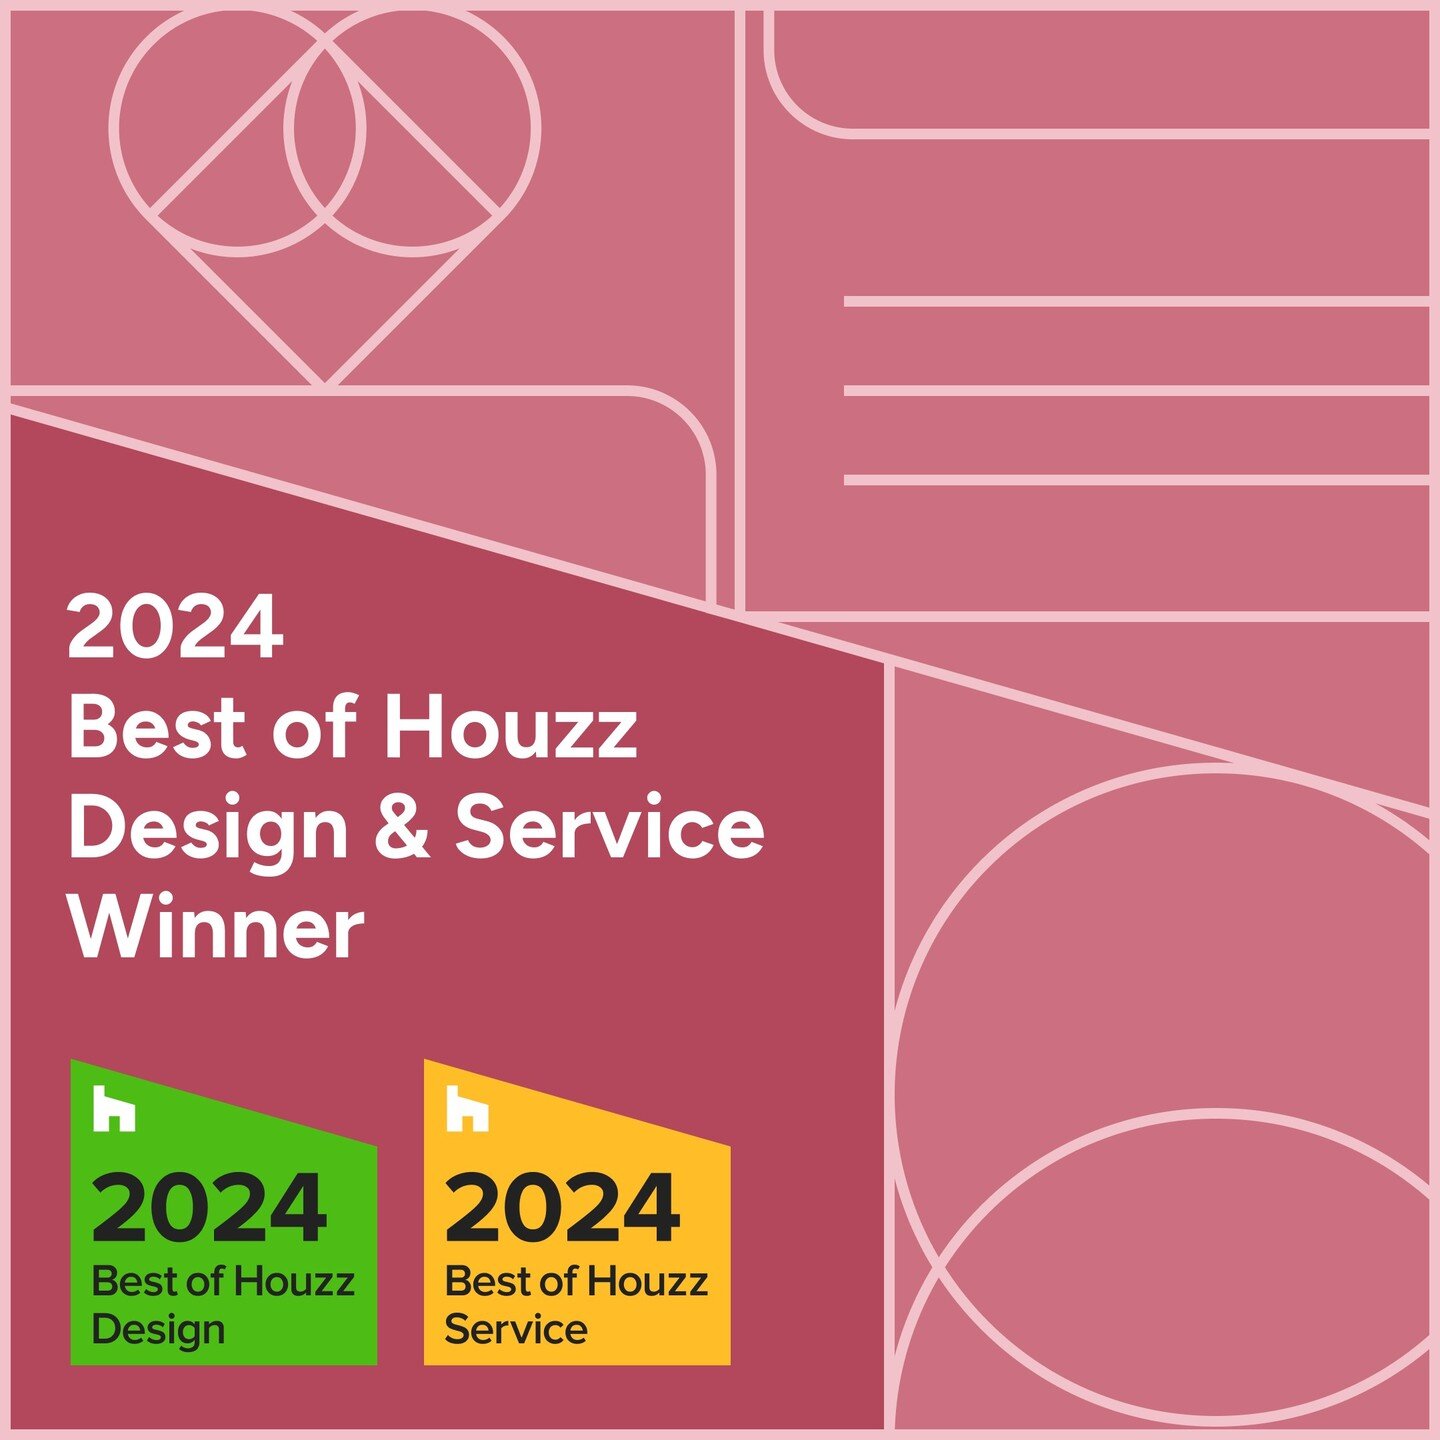 We&rsquo;re thrilled to share that Plantology Ltd is a Best of Houzz 2024 winner! We&rsquo;re so proud of what we have accomplished and honoured to be recognised for the hard work we put in on behalf of our clients.

@houzzuk @houzzpro #BestofHouzz20